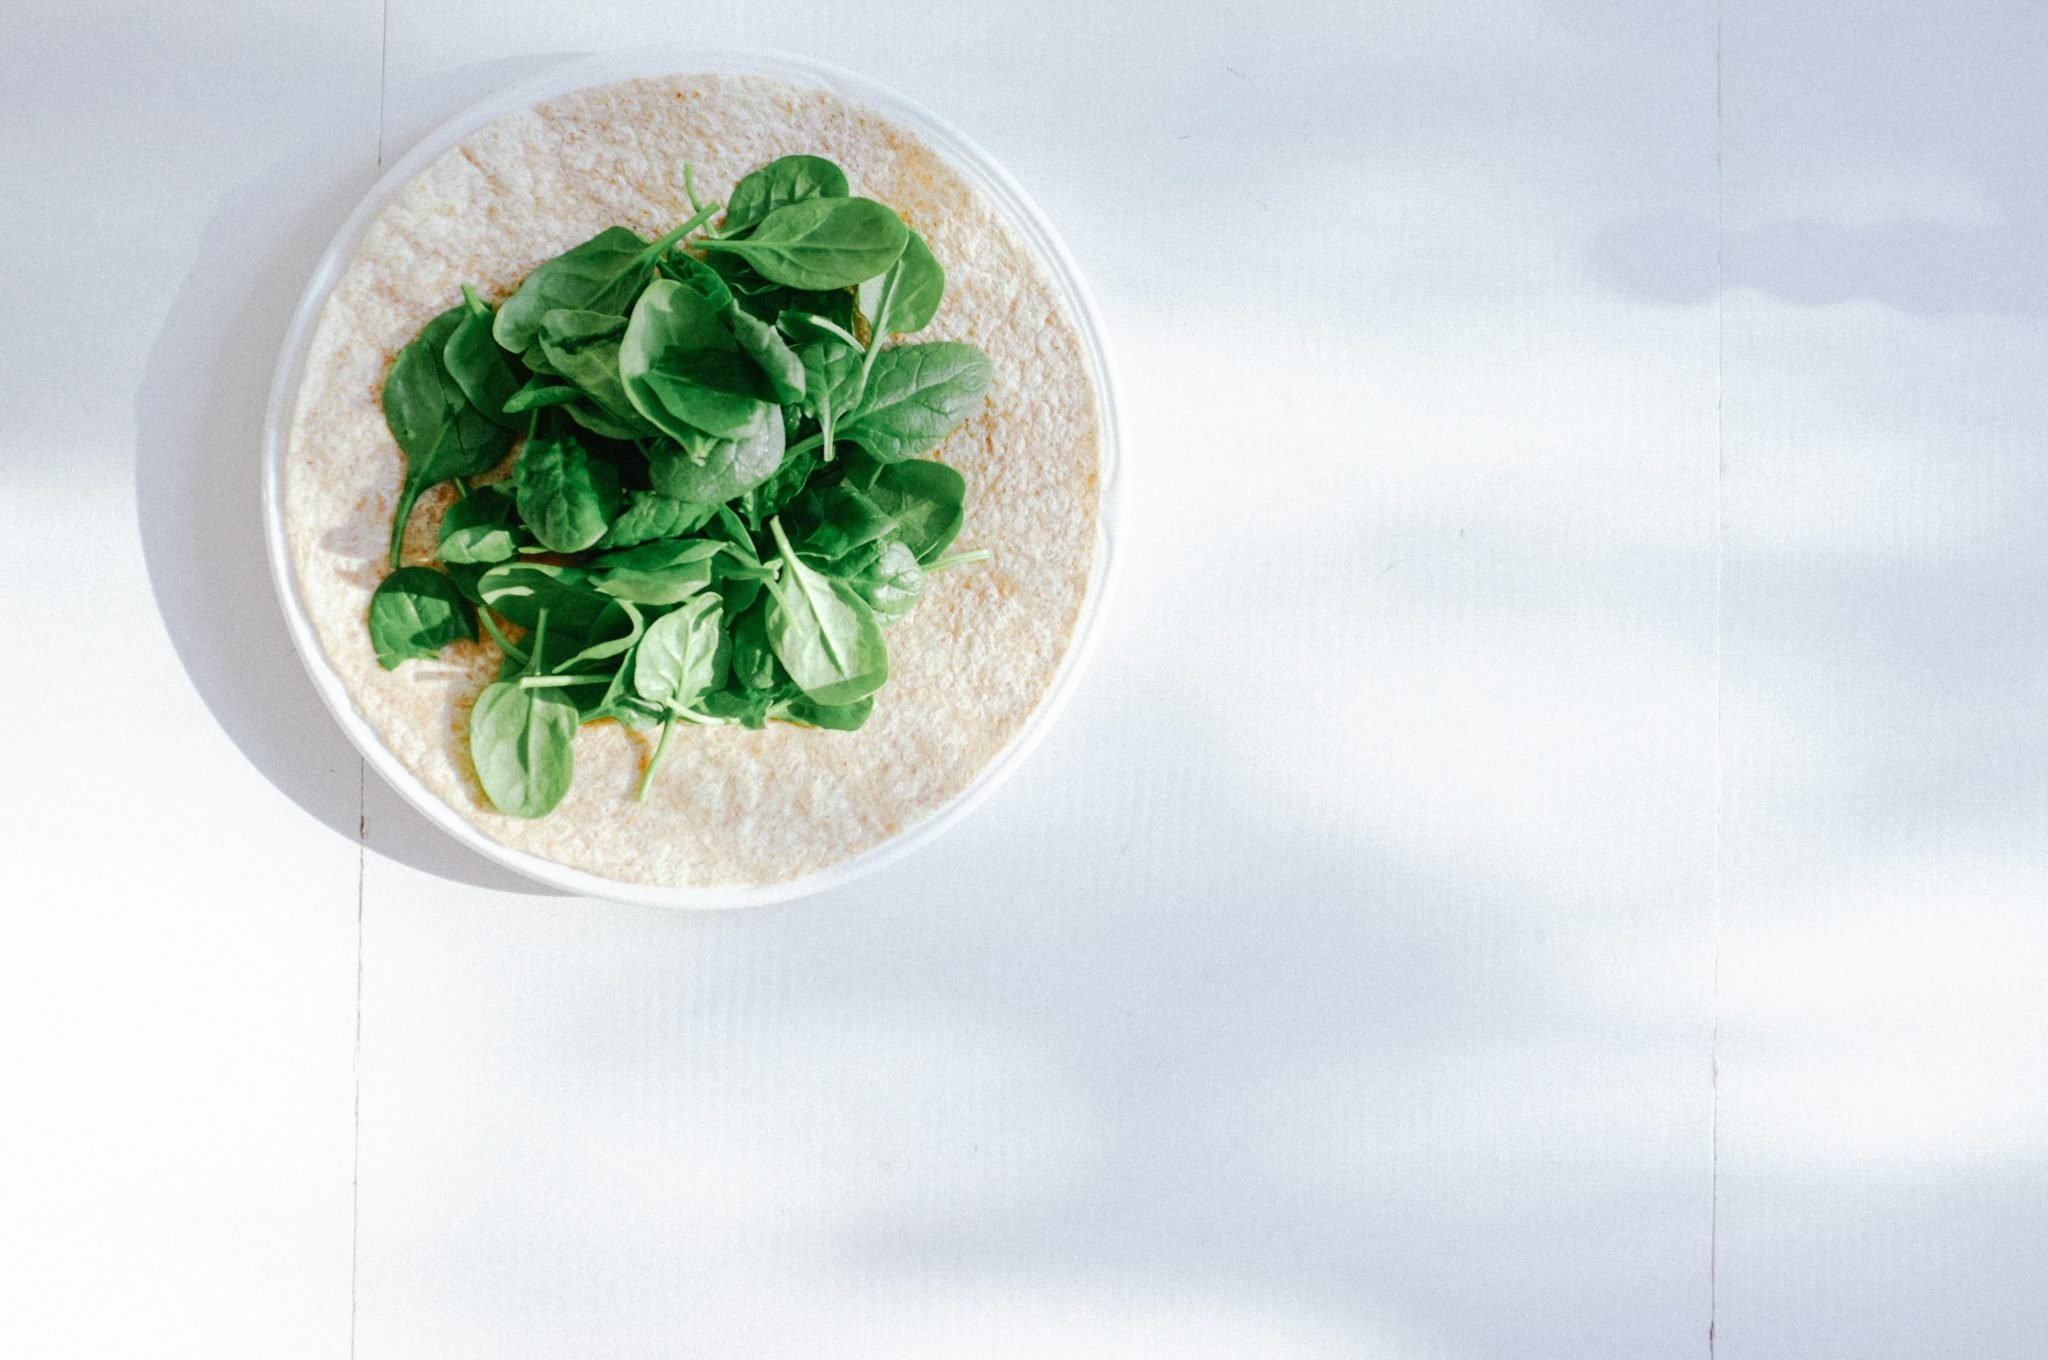 several leaves of spinach on top of a white tortilla to represent antinutrients like oxalates